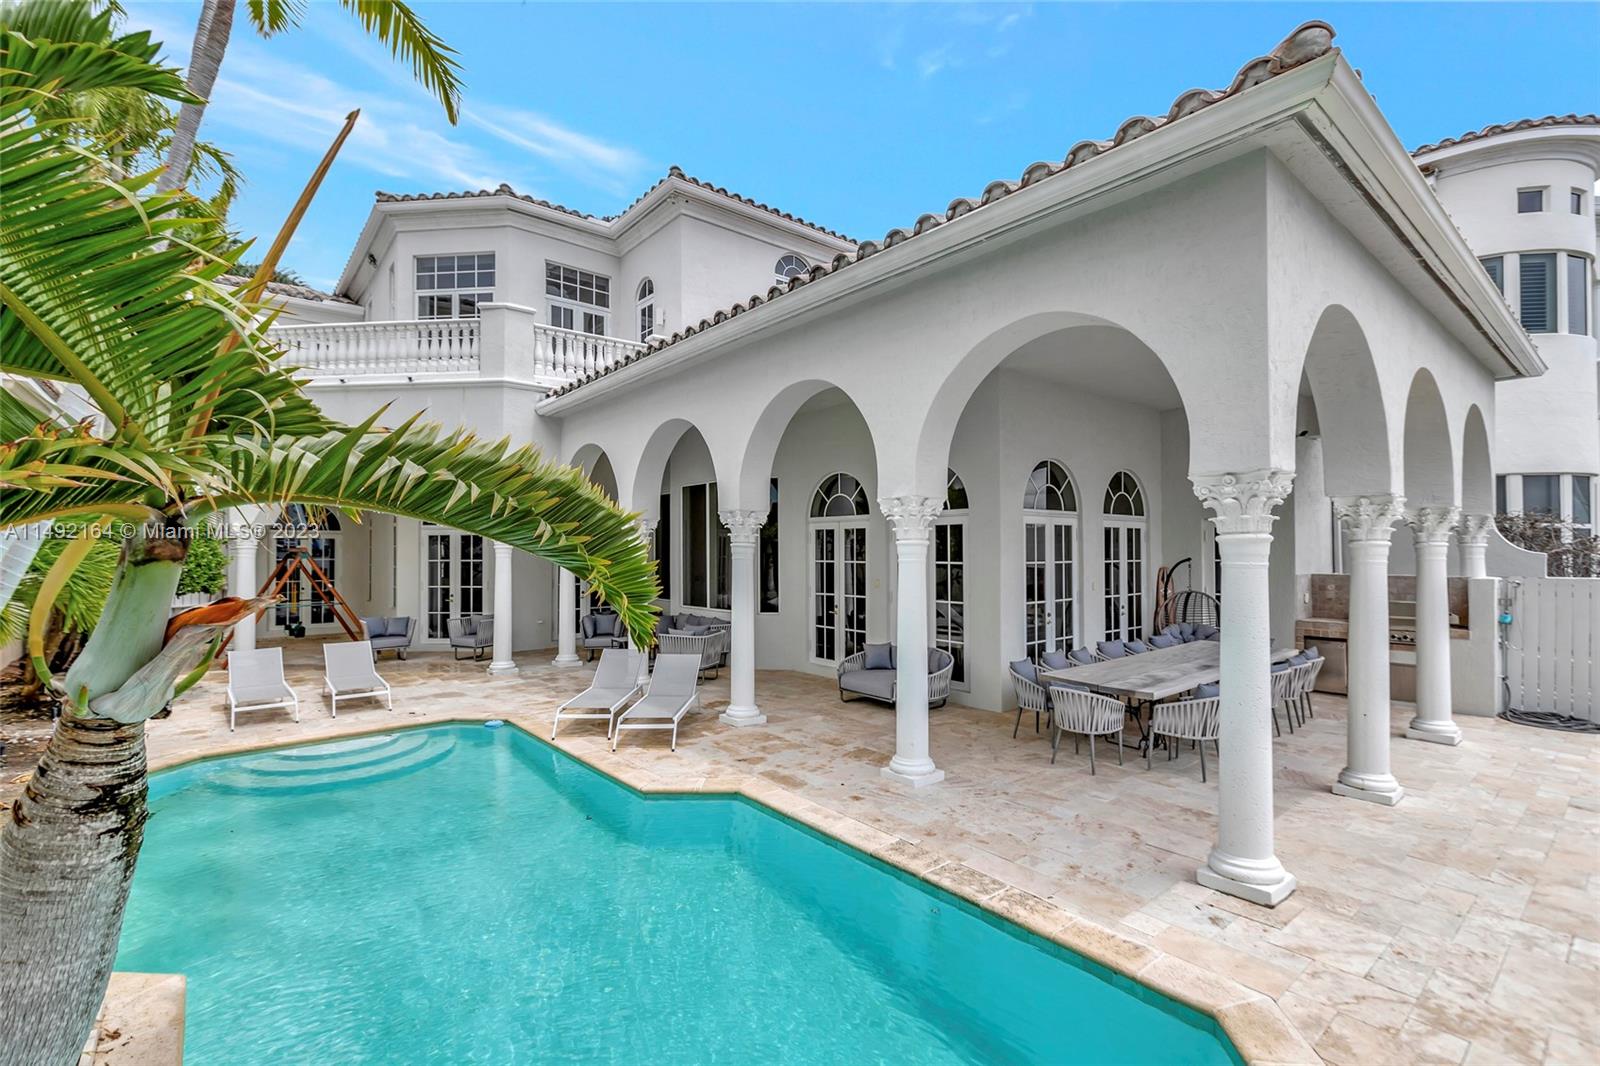 Your home away from home awaits on this ultra-exclusive private island! This stunning waterfront gem boasts 4 bedrooms plus a maid's room, 7 bathrooms, a large chef's kitchen, an elevator, bar, summer's kitchen, and a foyer entrance. You can enjoy your days poolside overlooking the Intracoastal and gorgeous Sunny Isles skyline. Unwind within the safety and security of one of the top gated communities in South Florida. With proximity to top dining, shopping, resorts, beaches, and luxury, you are within minutes of all that South Florida has to offer.